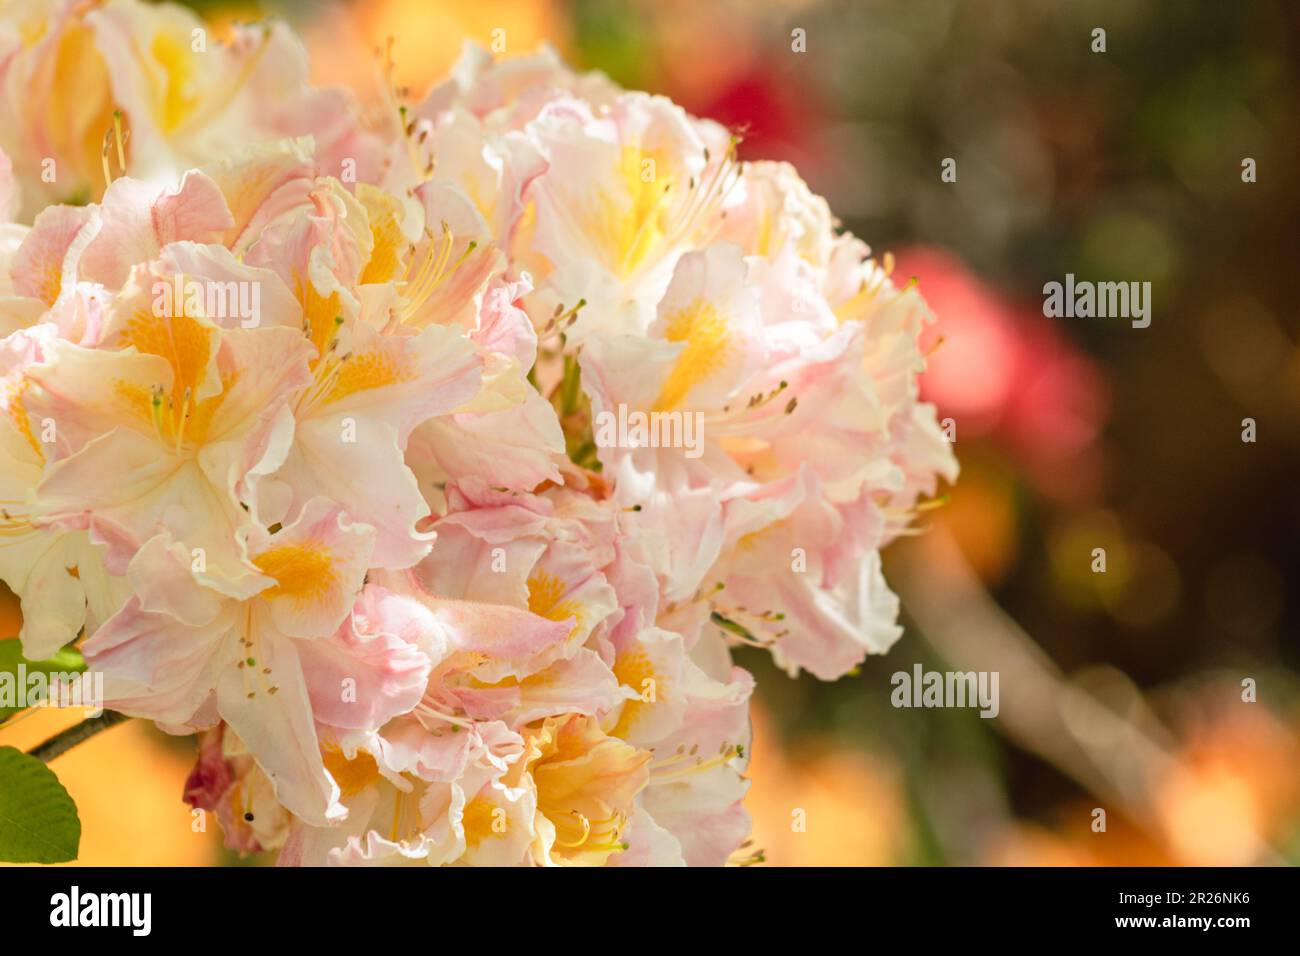 A close up background image of  pink and yellow Rhododendron flowers in bloom on the branch in a boquet. Stock Photo